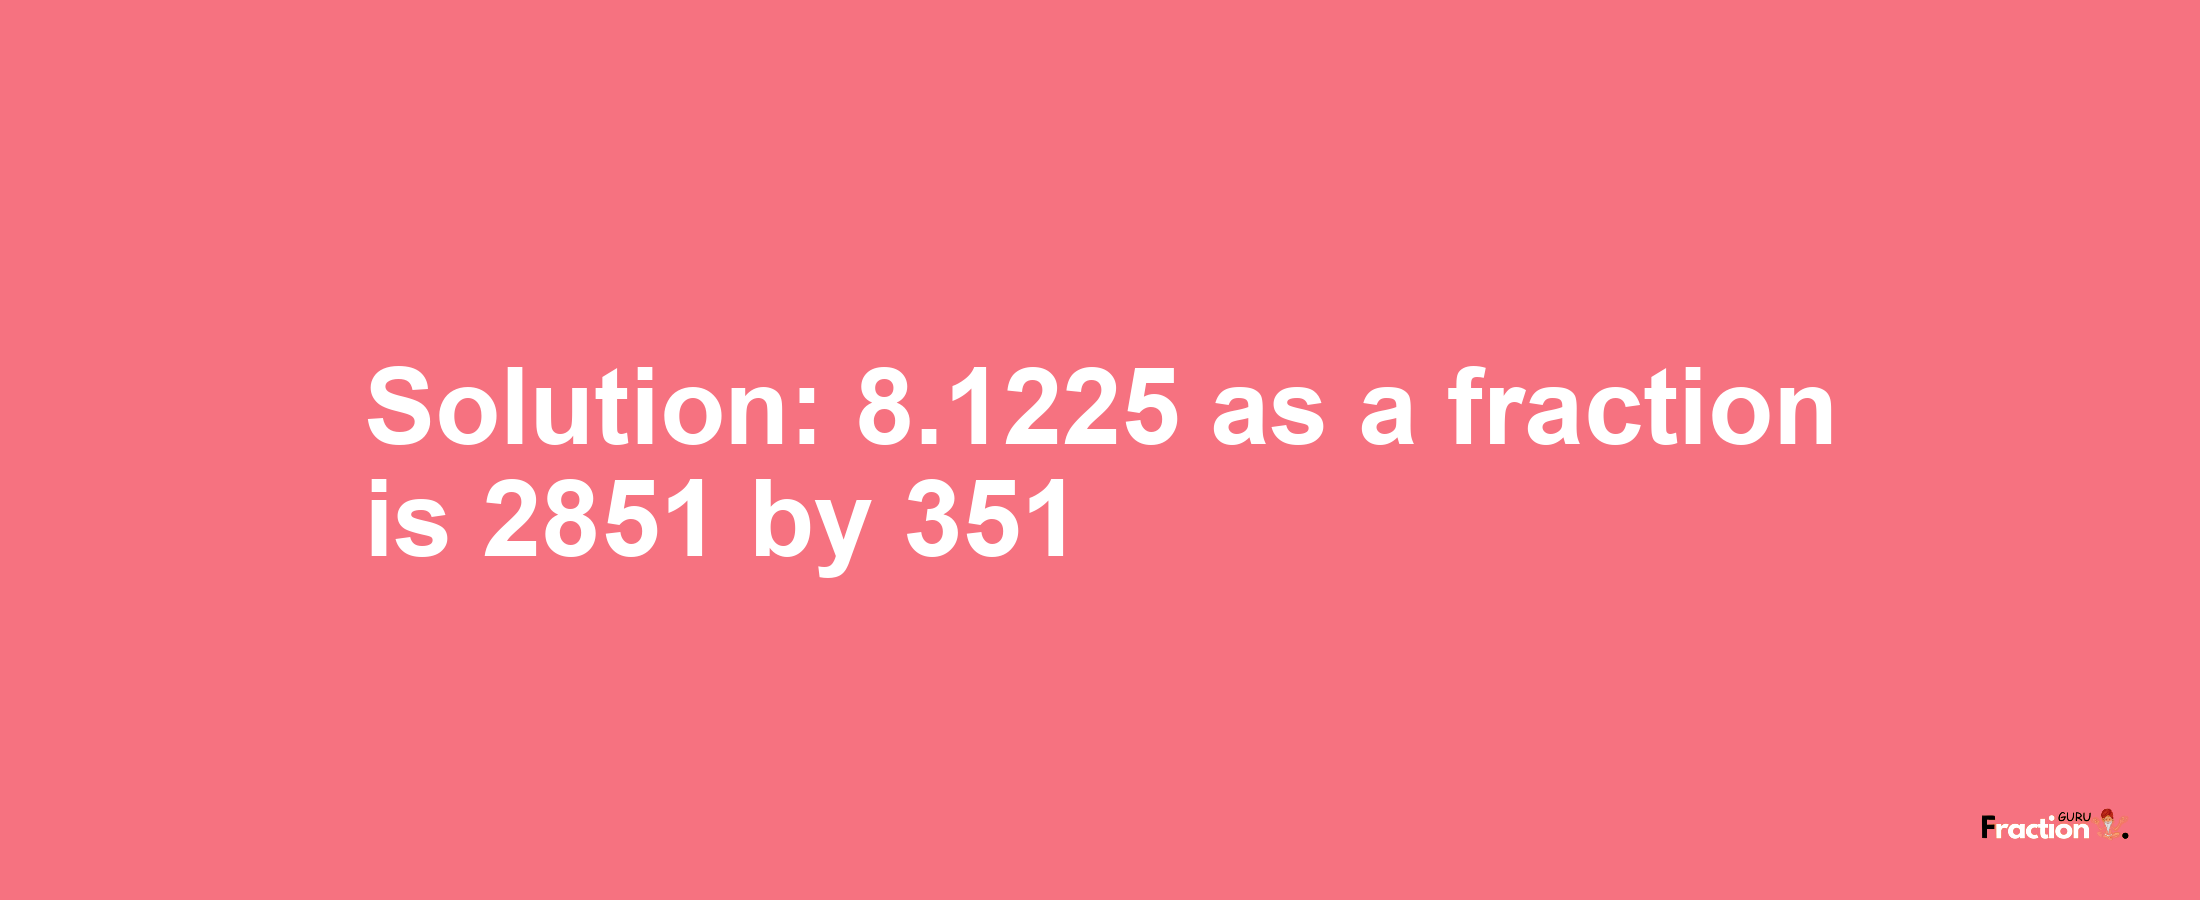 Solution:8.1225 as a fraction is 2851/351